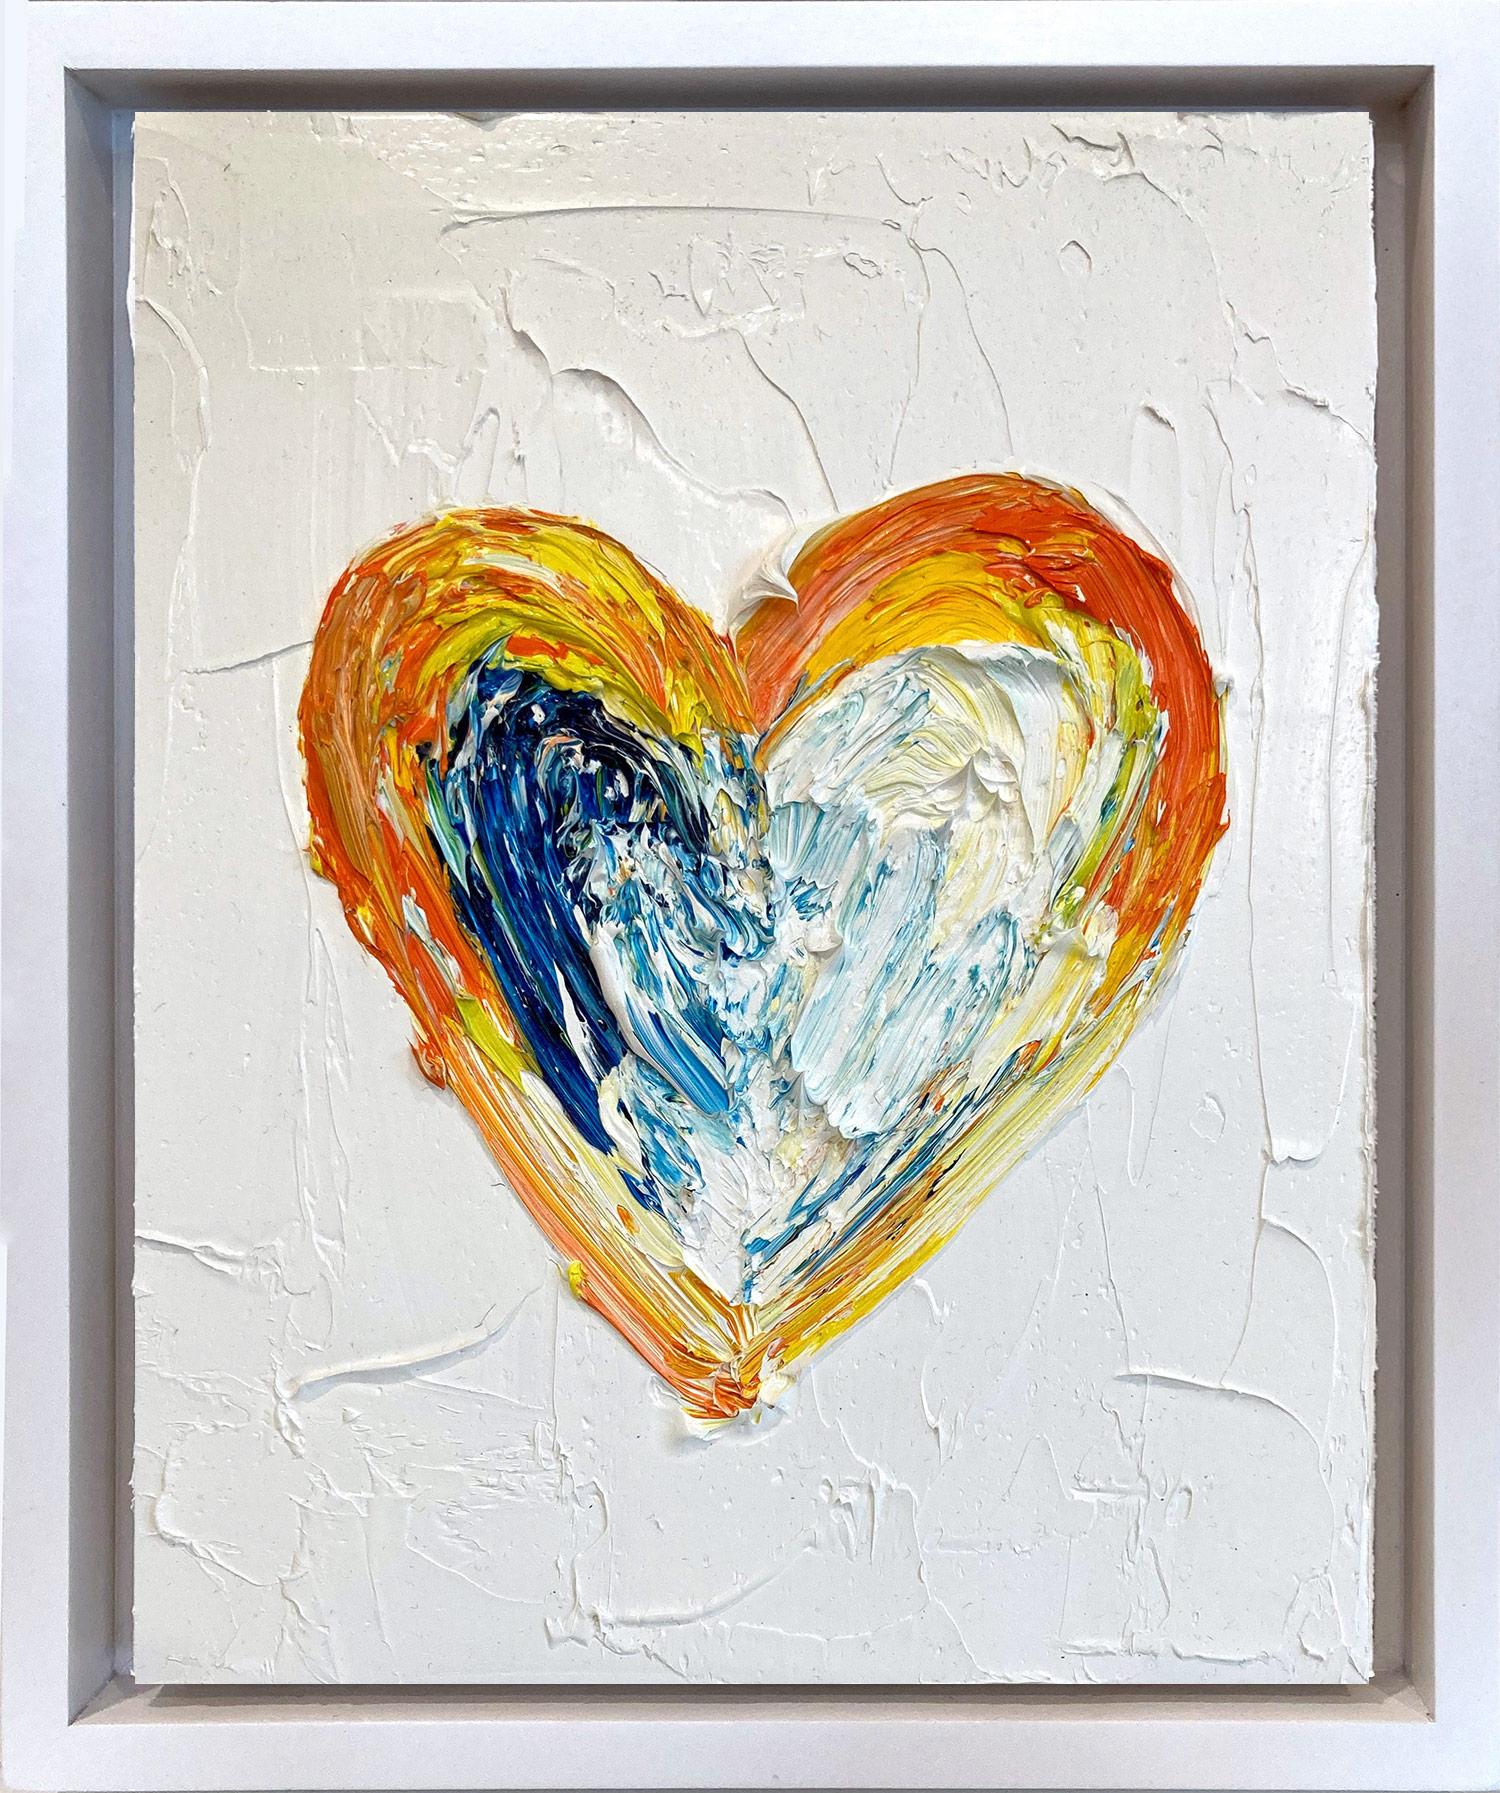 Cindy Shaoul Figurative Painting - "My Let It Be Heart" Contemporary Pop Art Gold Oil Painting with Floater Frame